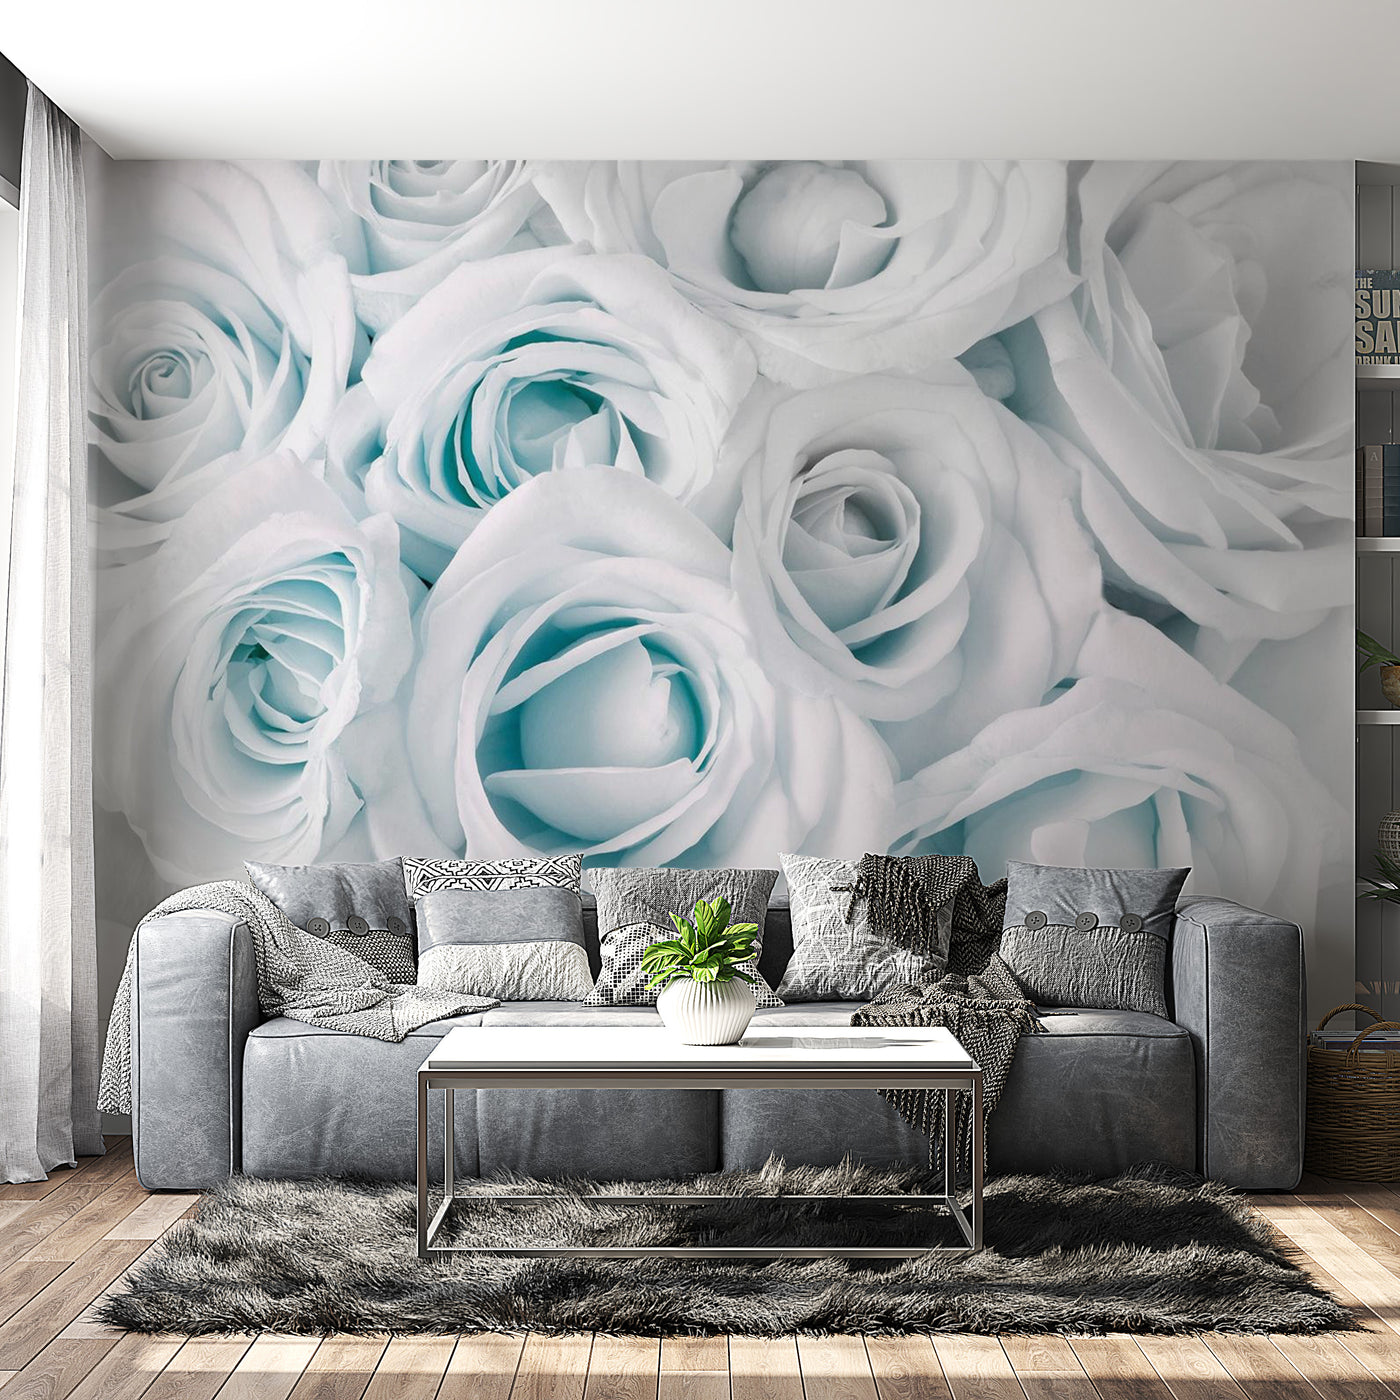 Peel & Stick Floral Wall Mural - Satin Rose Turquoise - Removable Wall Decals